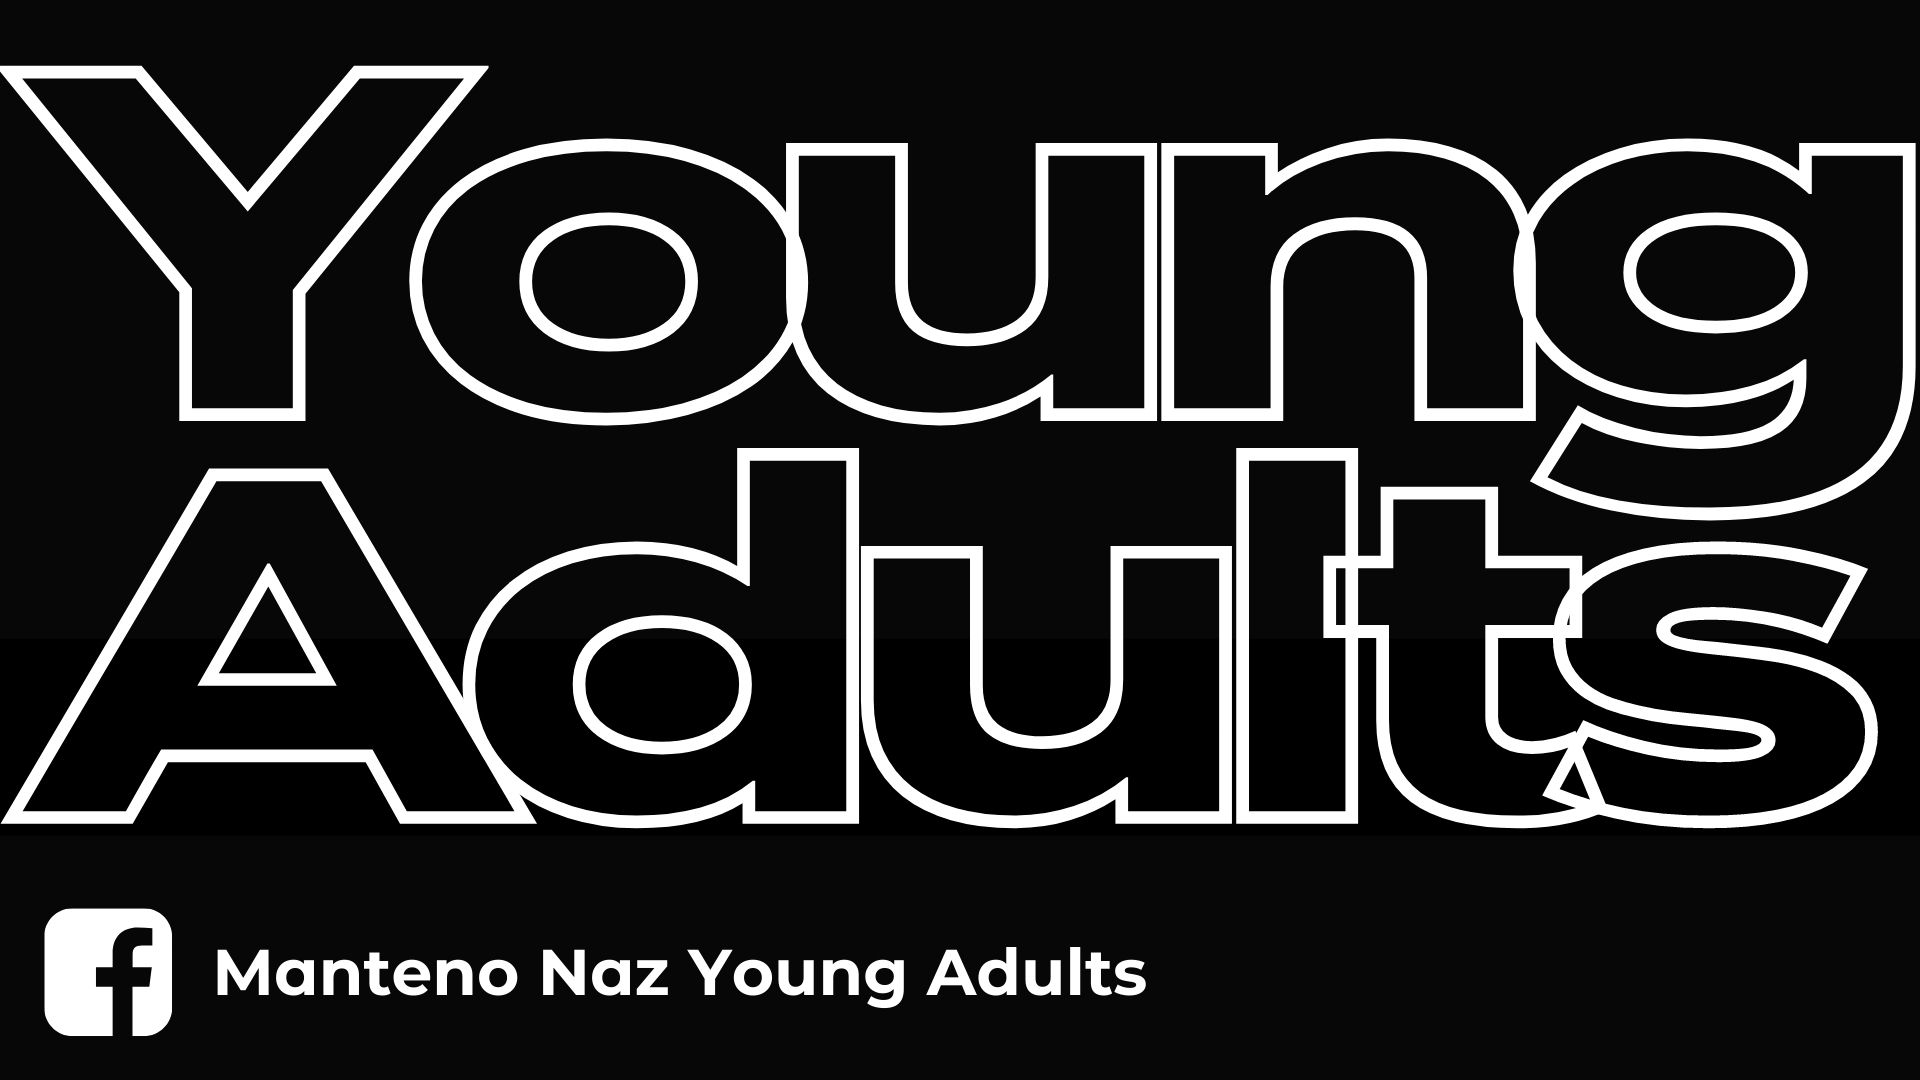 young adult